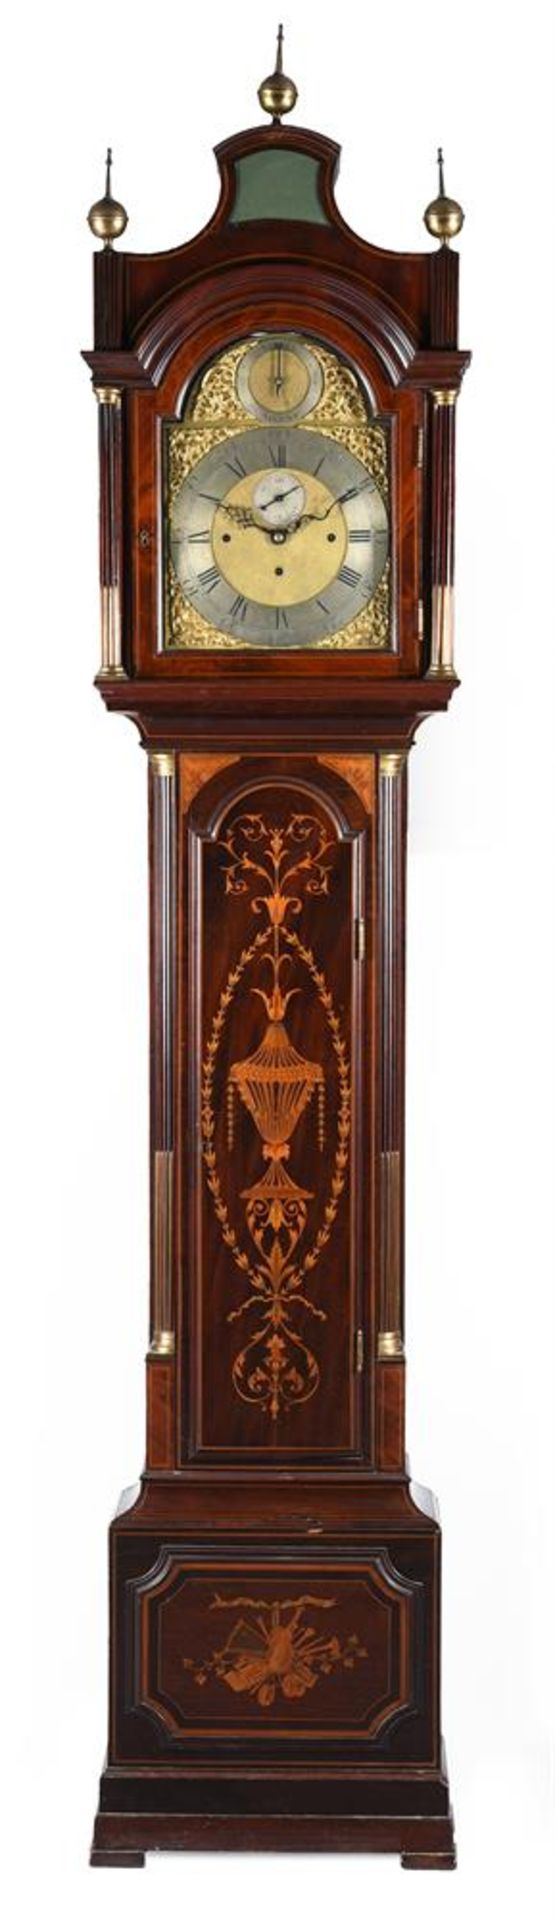 A LATE VICTORIAN INLAID MAHOGANY QUARTER-CHIMING EIGHT-DAY LONGCASE CLOCK